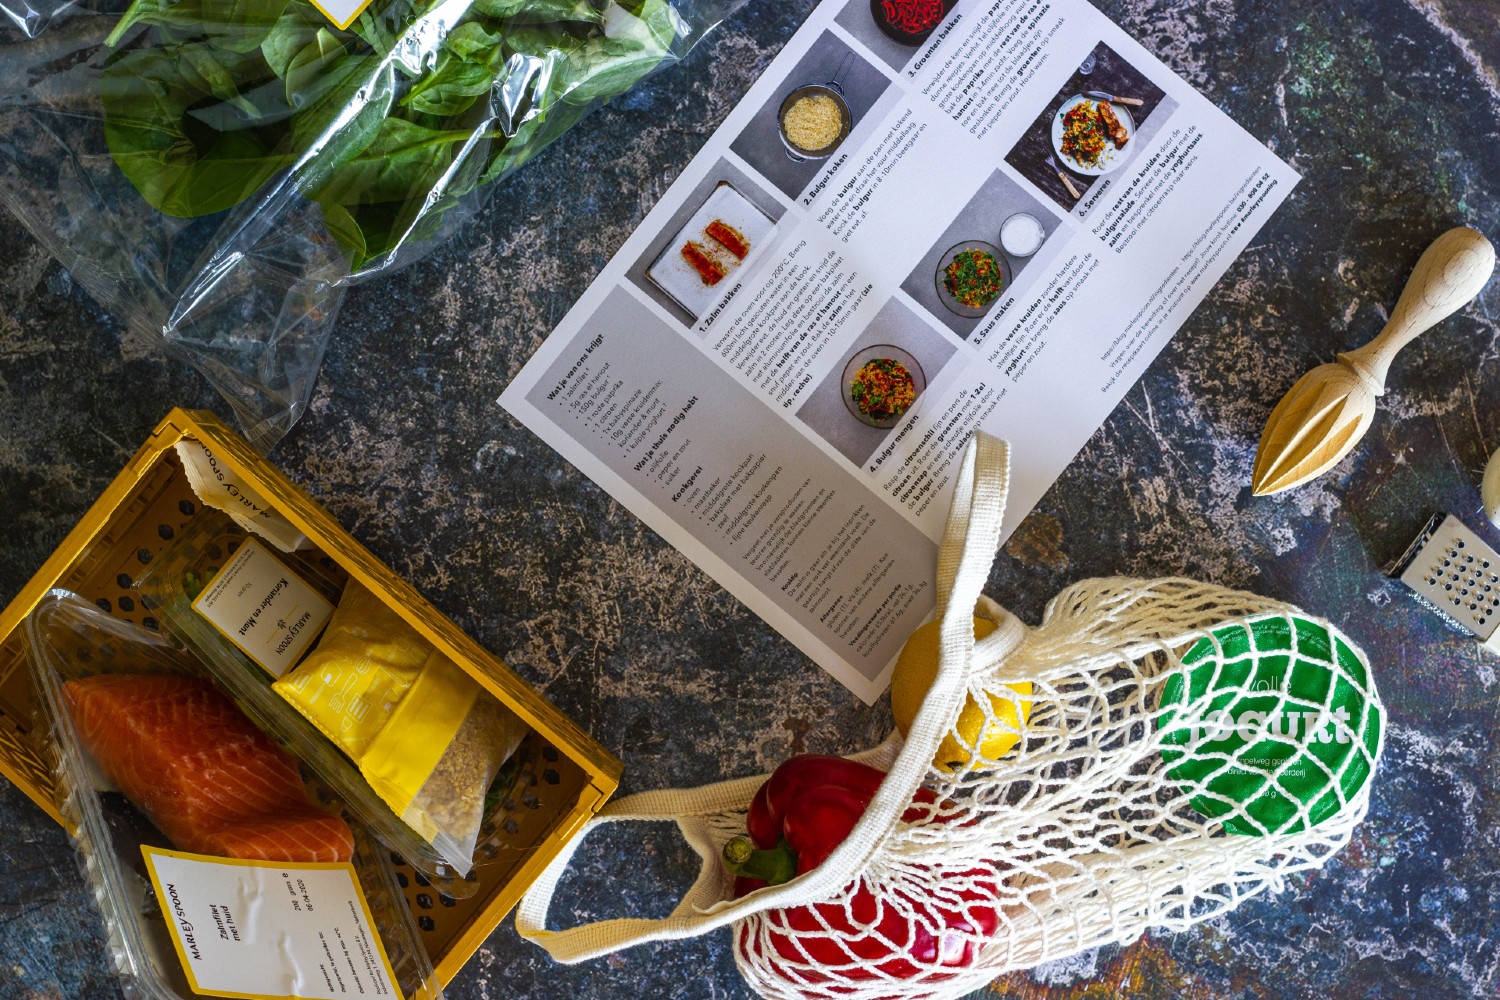 21 Top Meal Kit Delivery Services to Try in 2021 - Artful Living Magazine